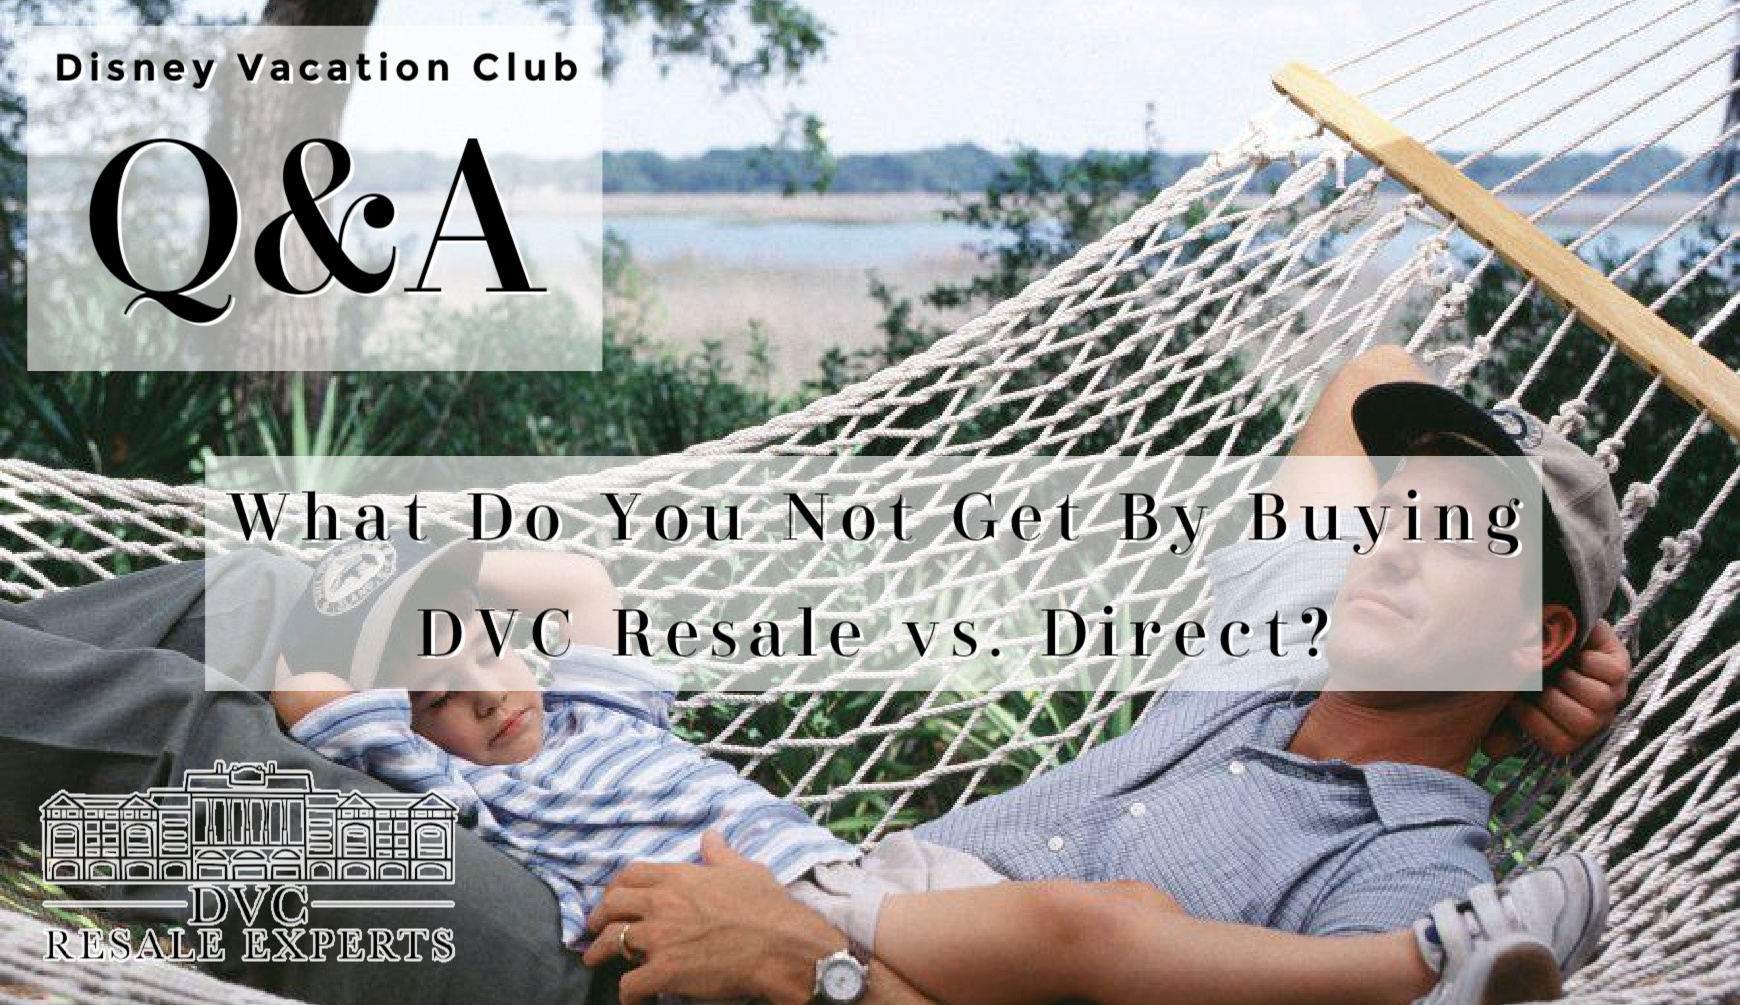 What Do You Not Get By Buying DVC Resale